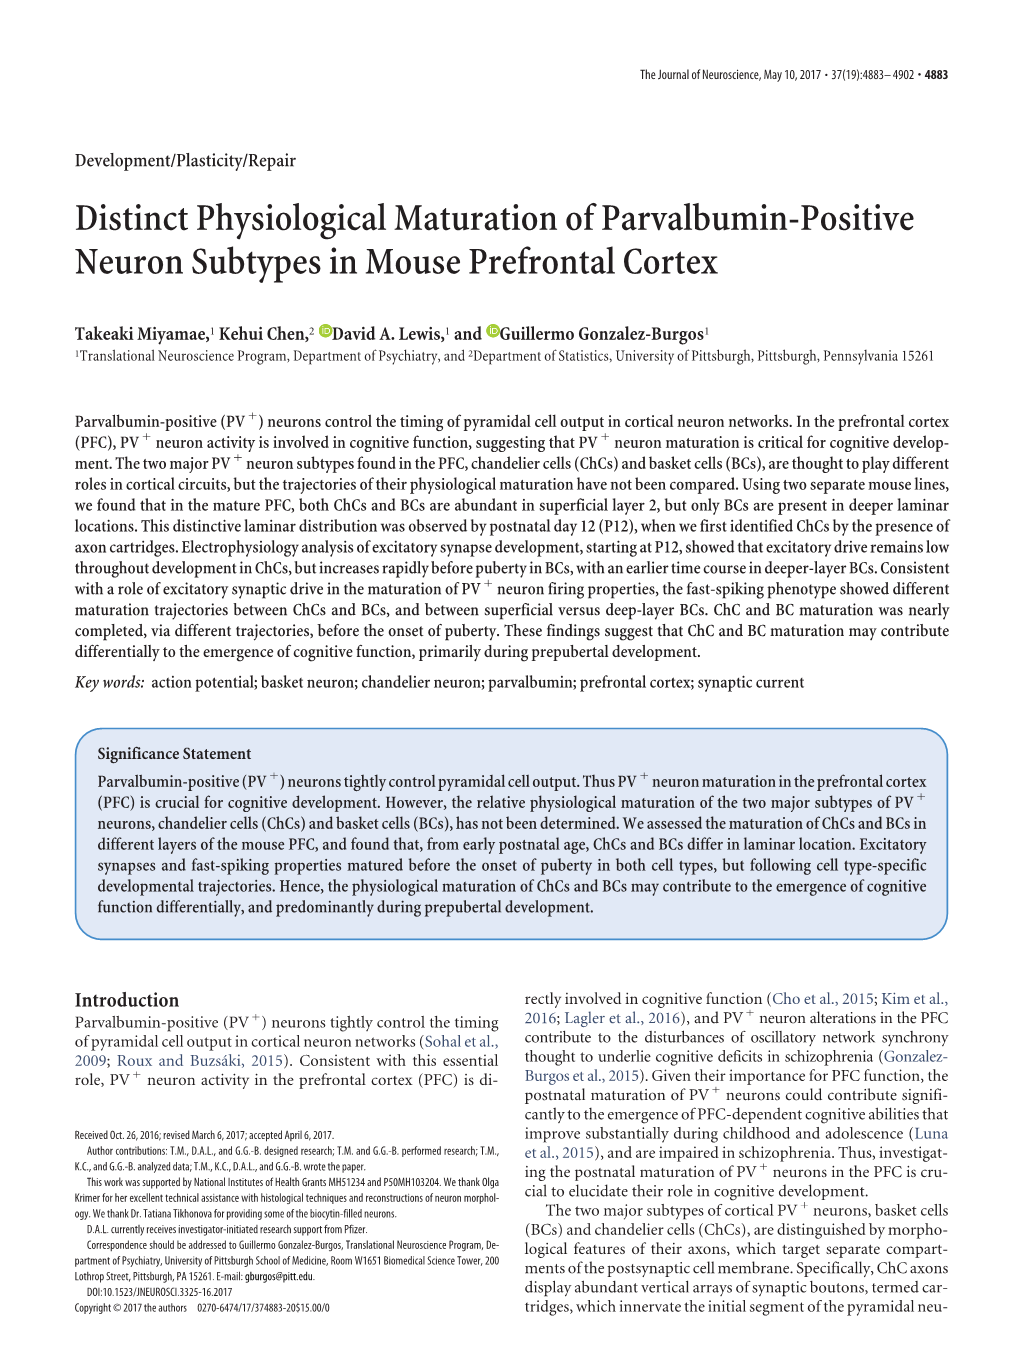 Distinct Physiological Maturation of Parvalbumin-Positive Neuron Subtypes in Mouse Prefrontal Cortex